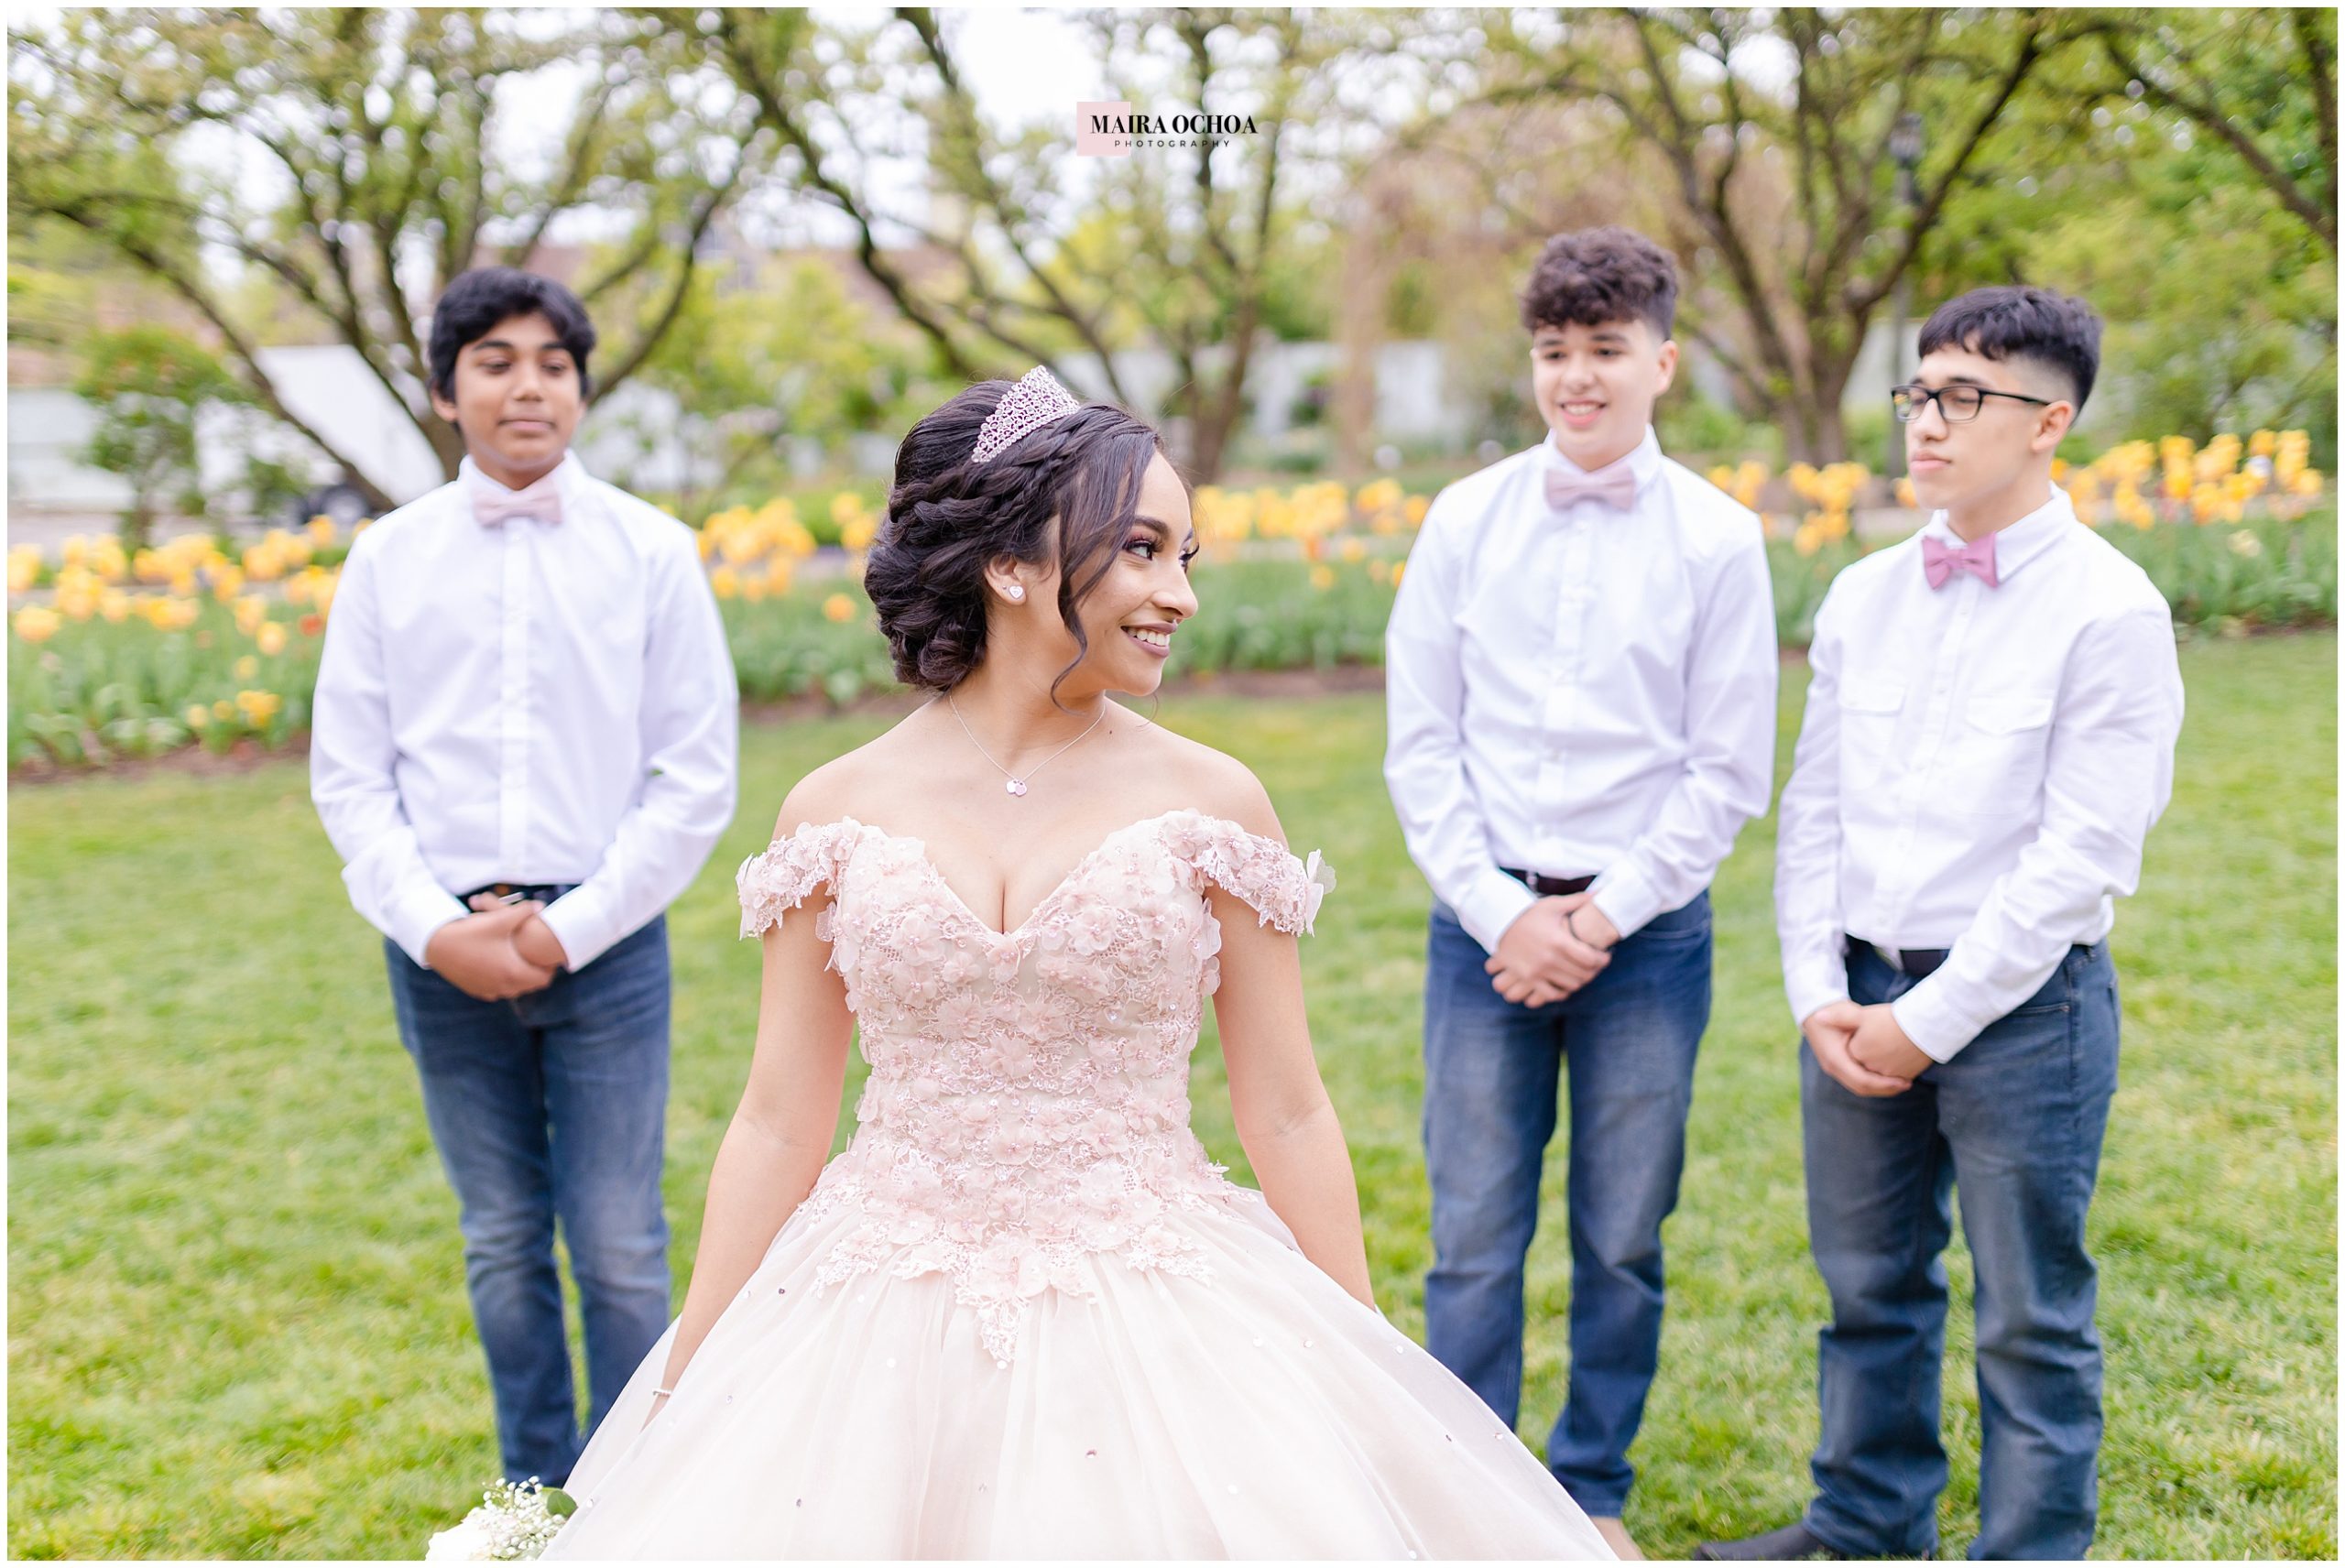 Quinceañera and Chambelanes formal portraits